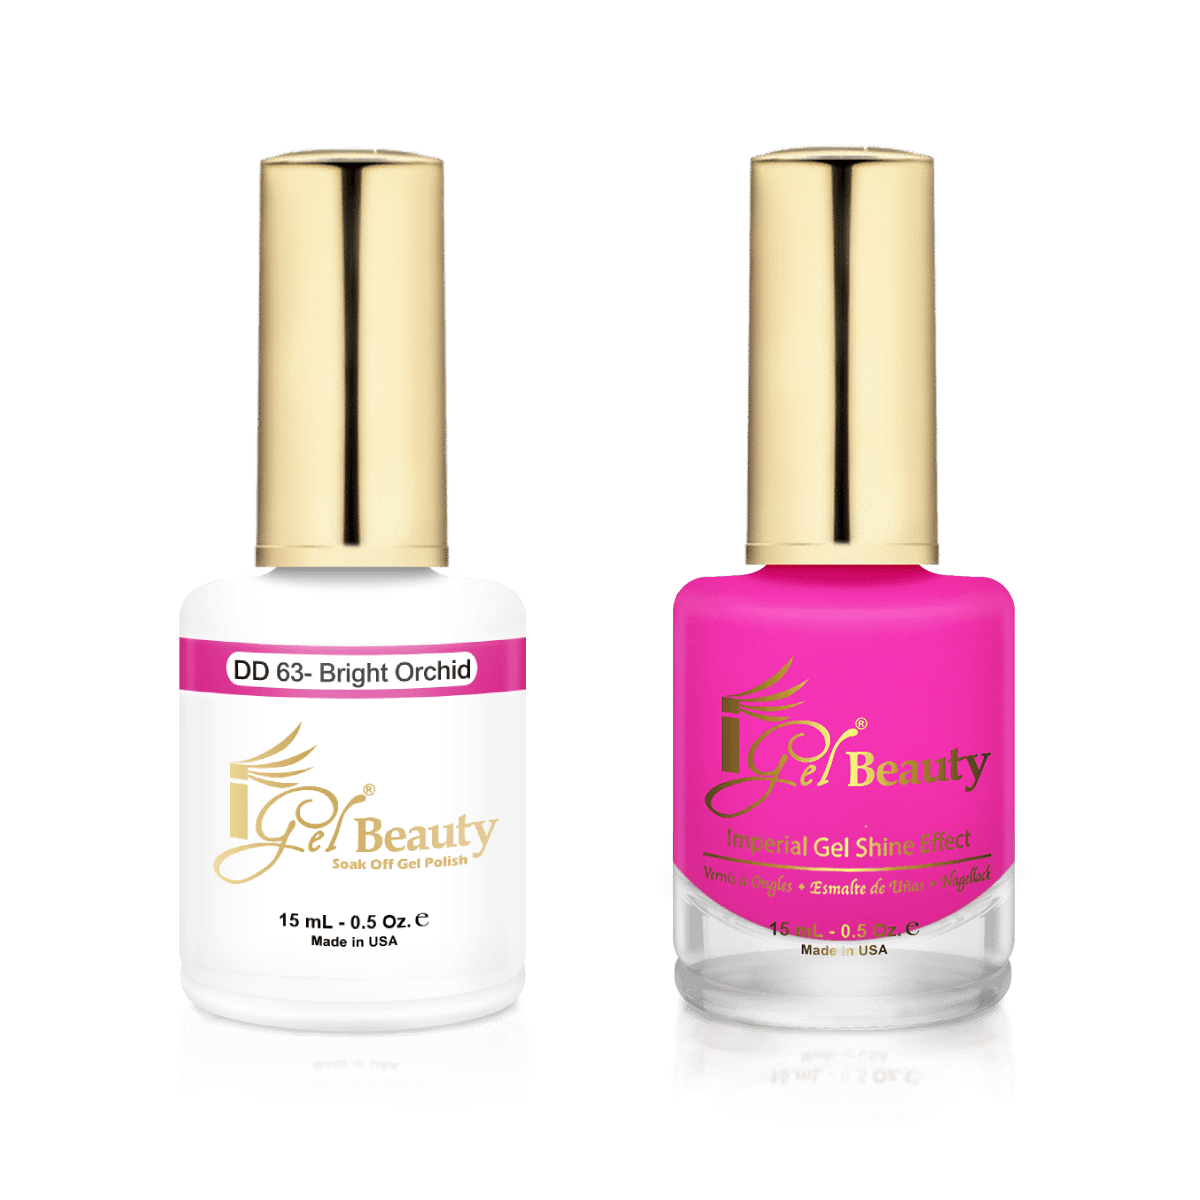 IGel Duo Gel Polish + Matching Nail Lacquer DD 63 BRIGHT ORCHID